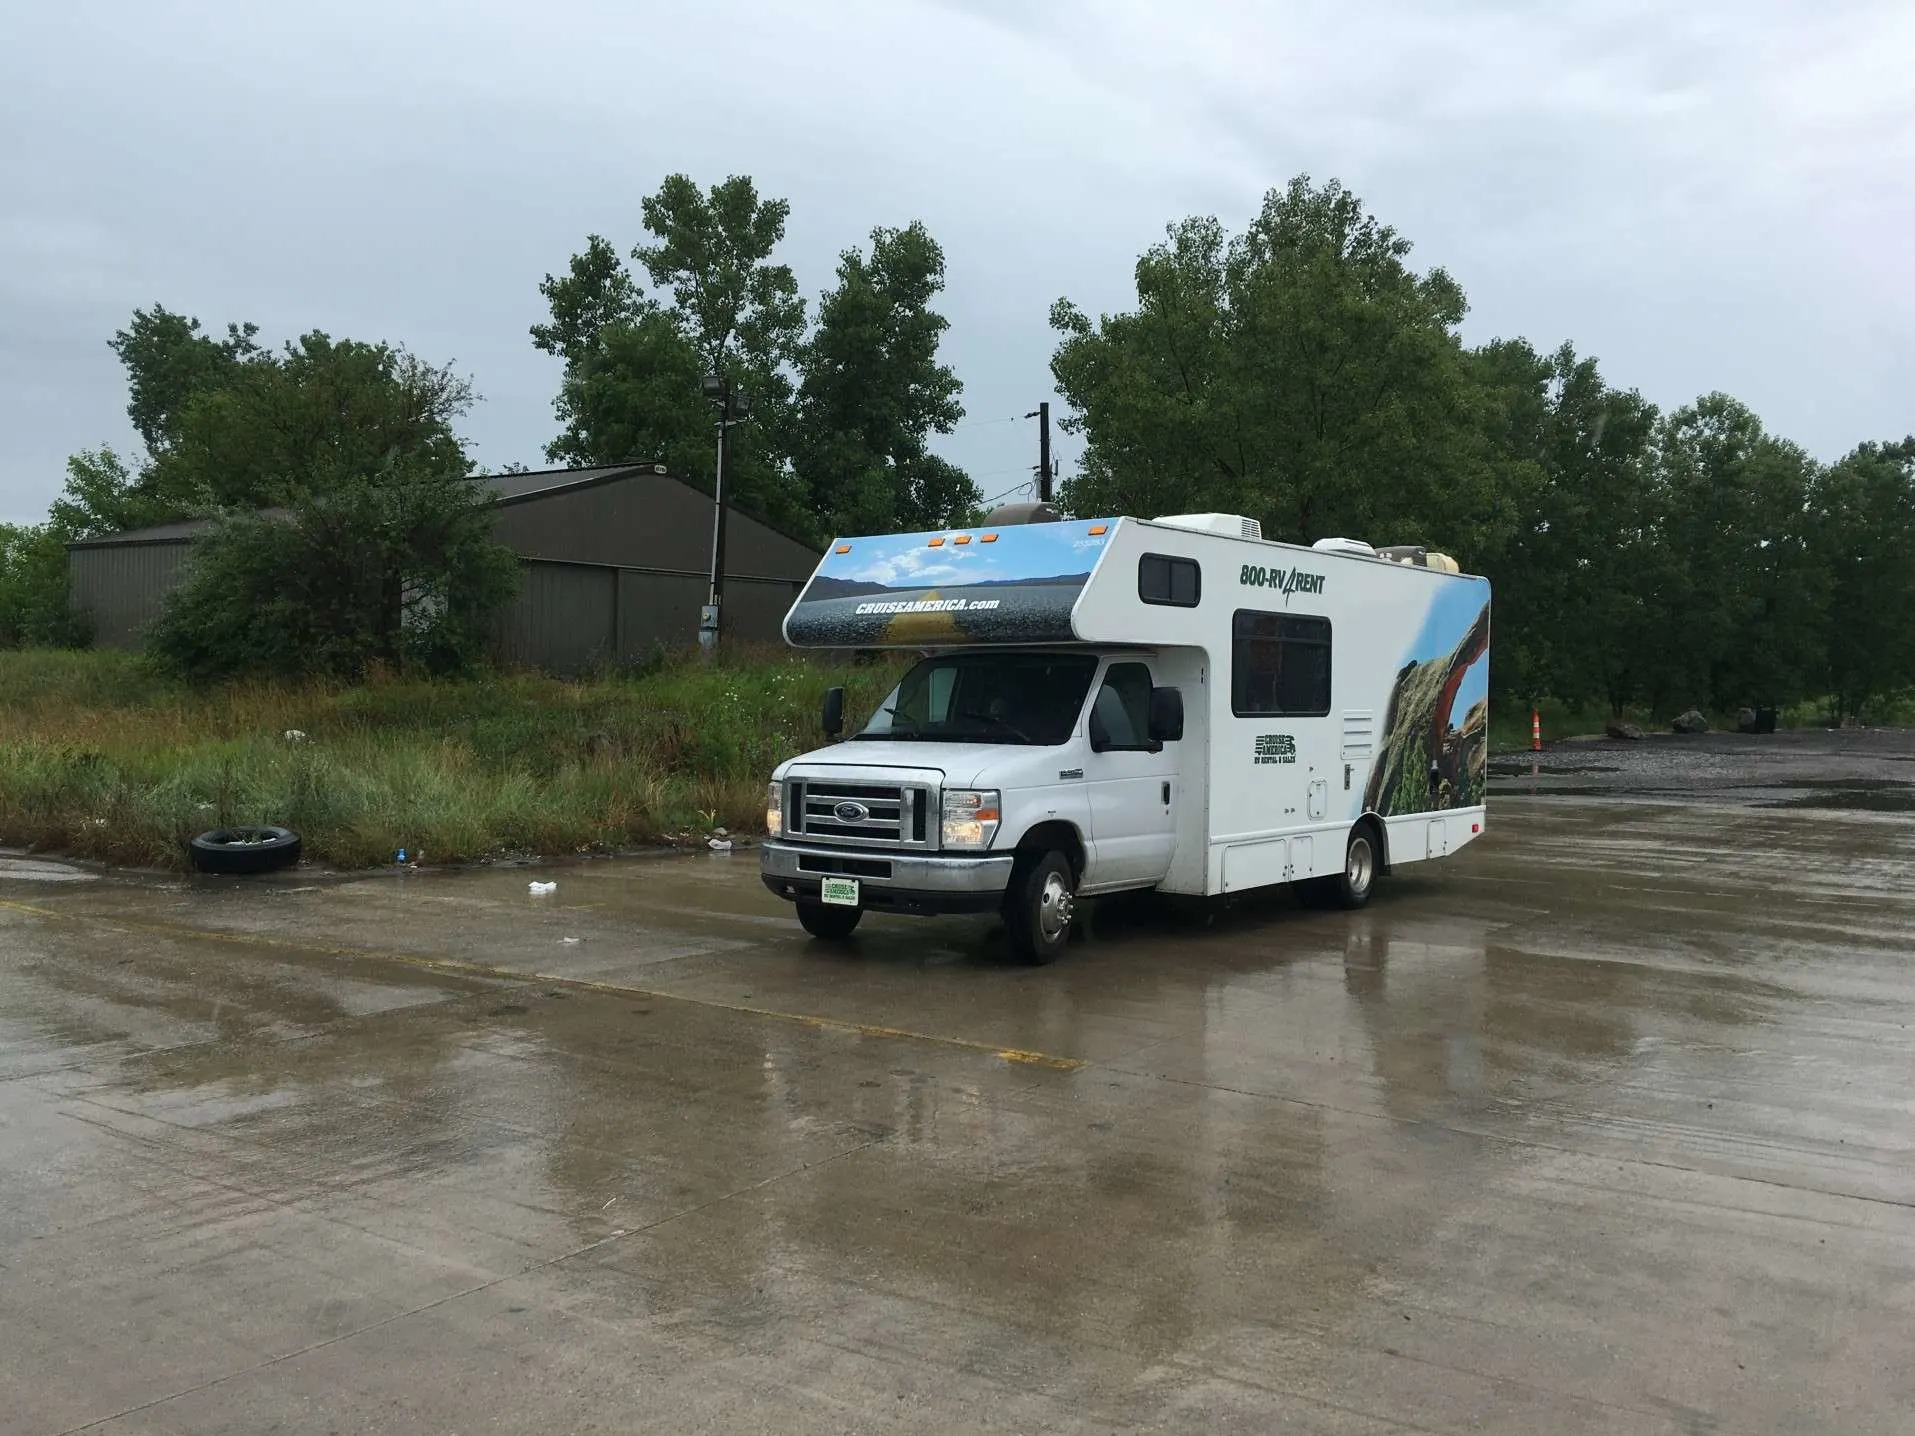 RV parked in a rain storm